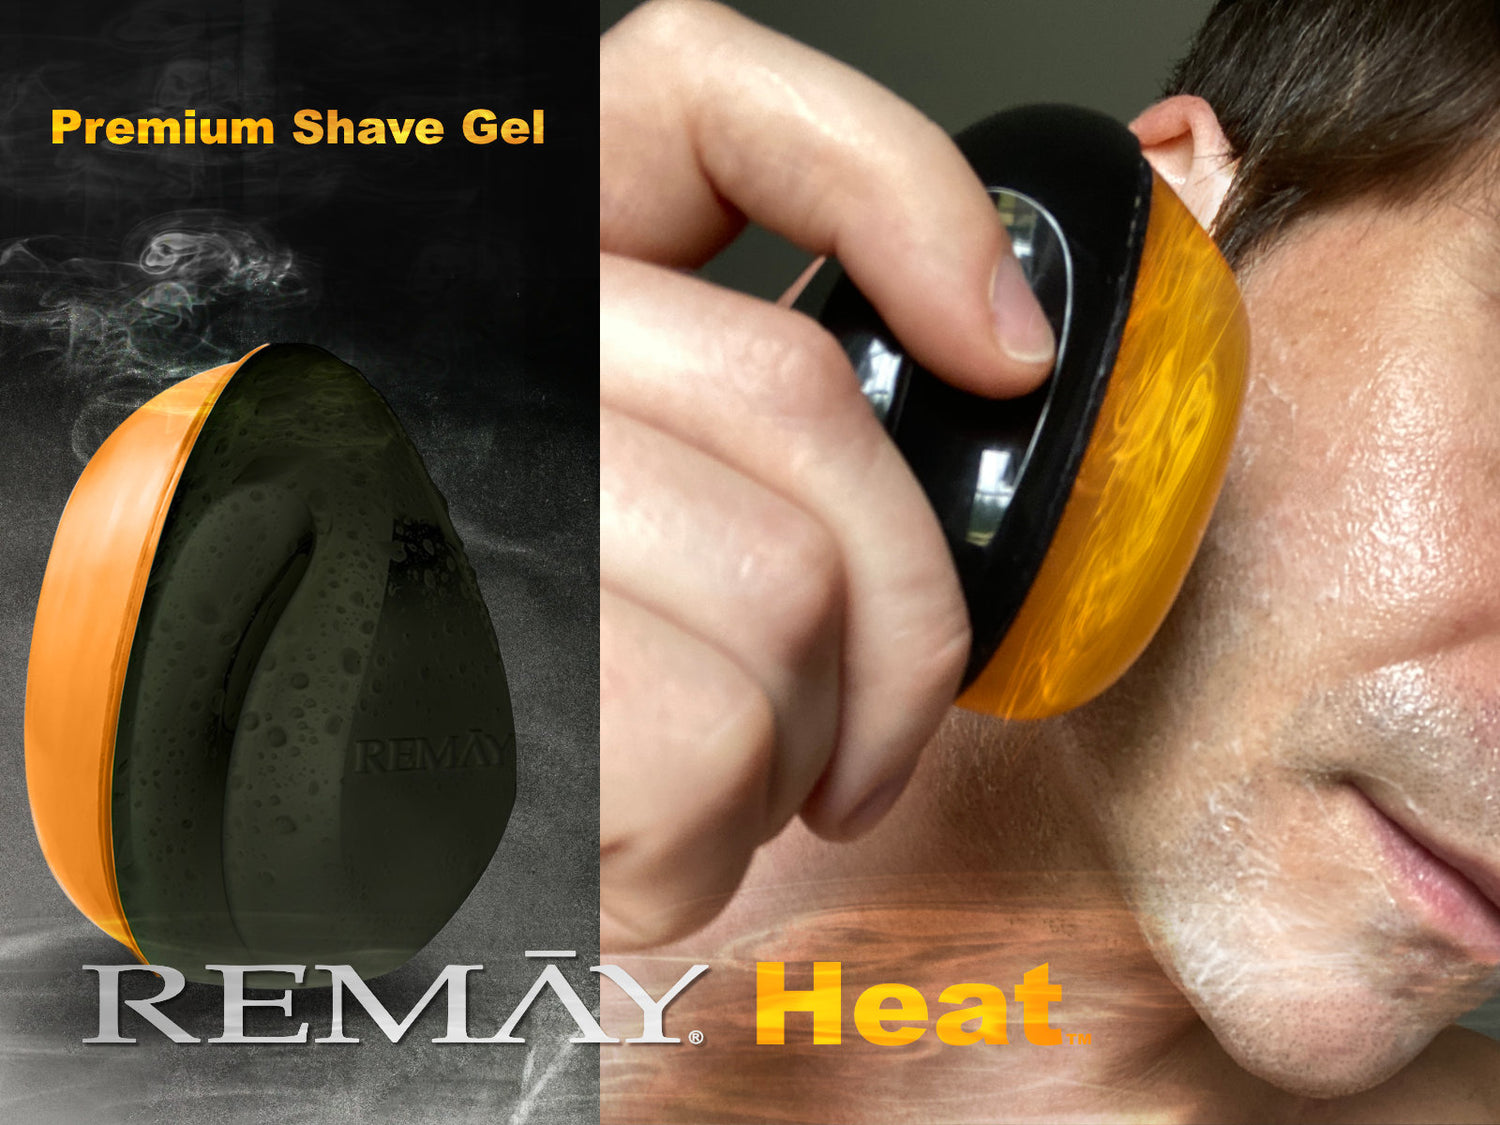 A Hot Gel Shave Like Never Before